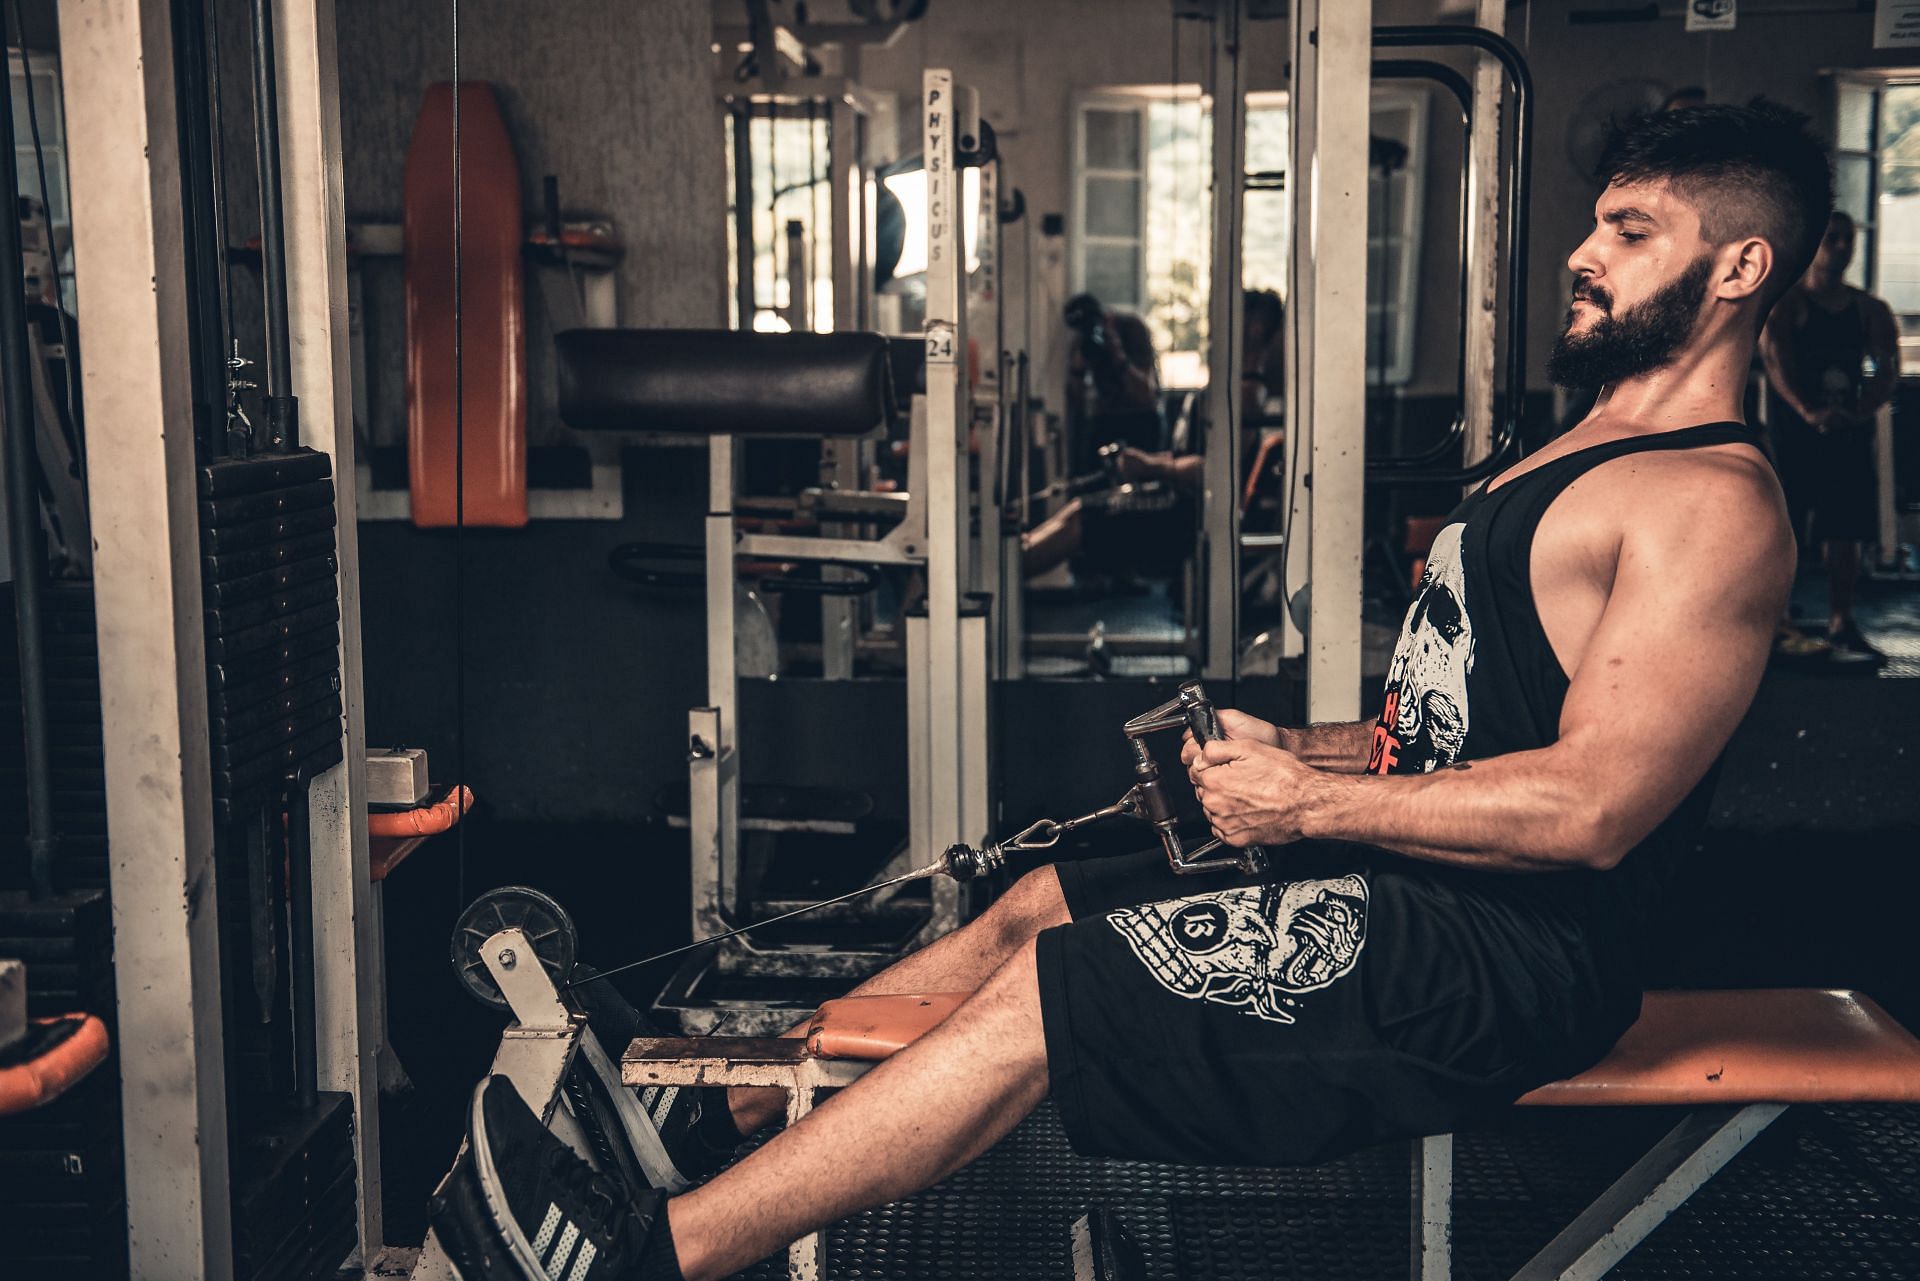 Want to get six-pack abs? Try these effective machine exercises. (Image via Pexels / Cesar Galeao)